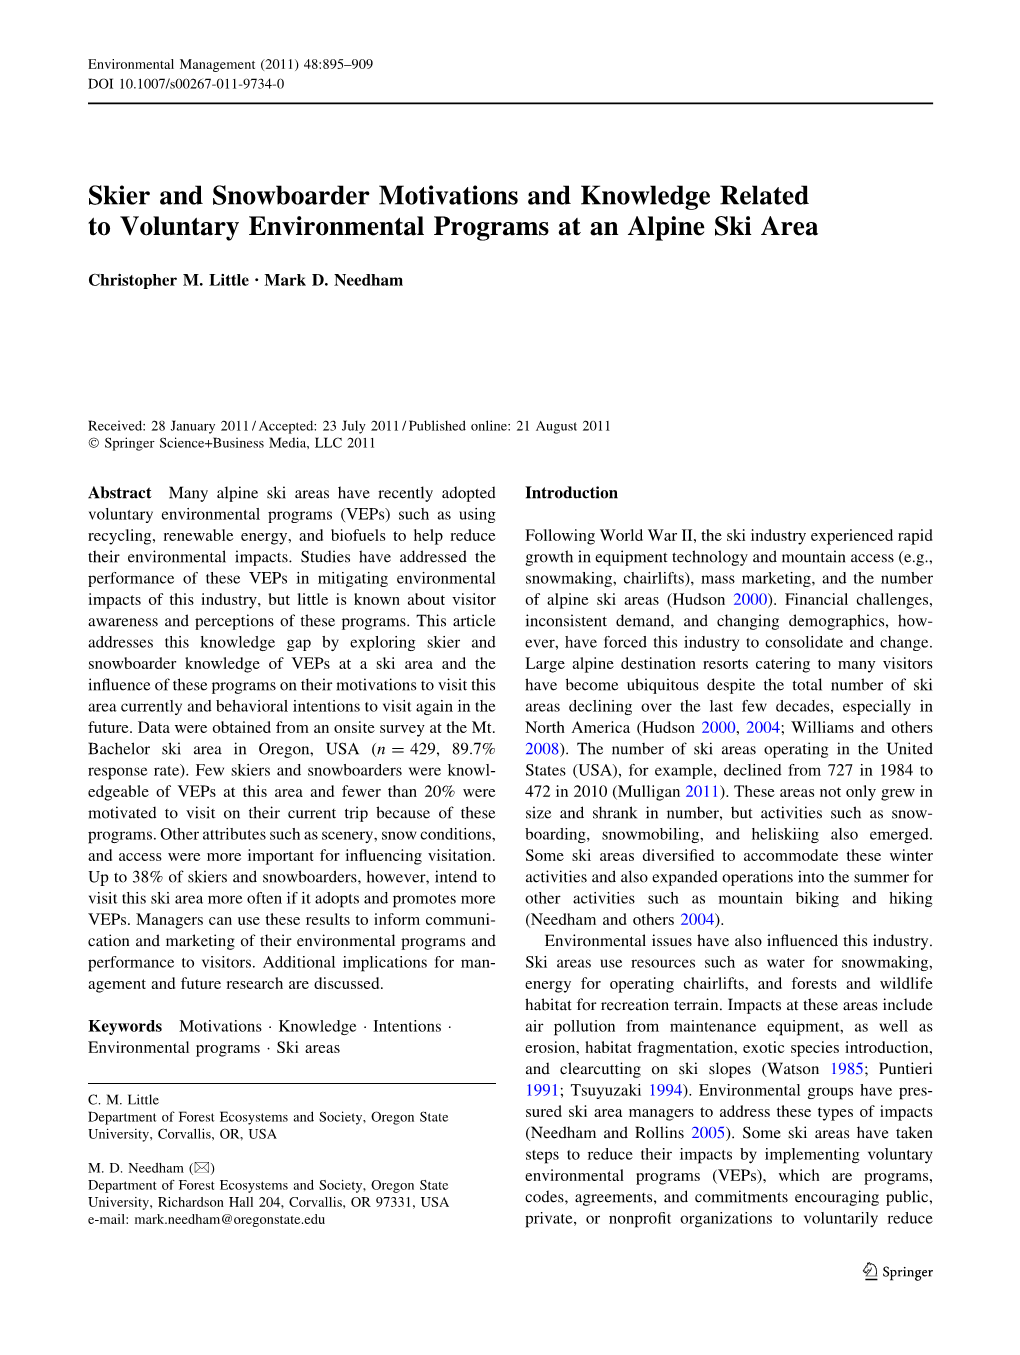 Skier and Snowboarder Motivations and Knowledge Related to Voluntary Environmental Programs at an Alpine Ski Area